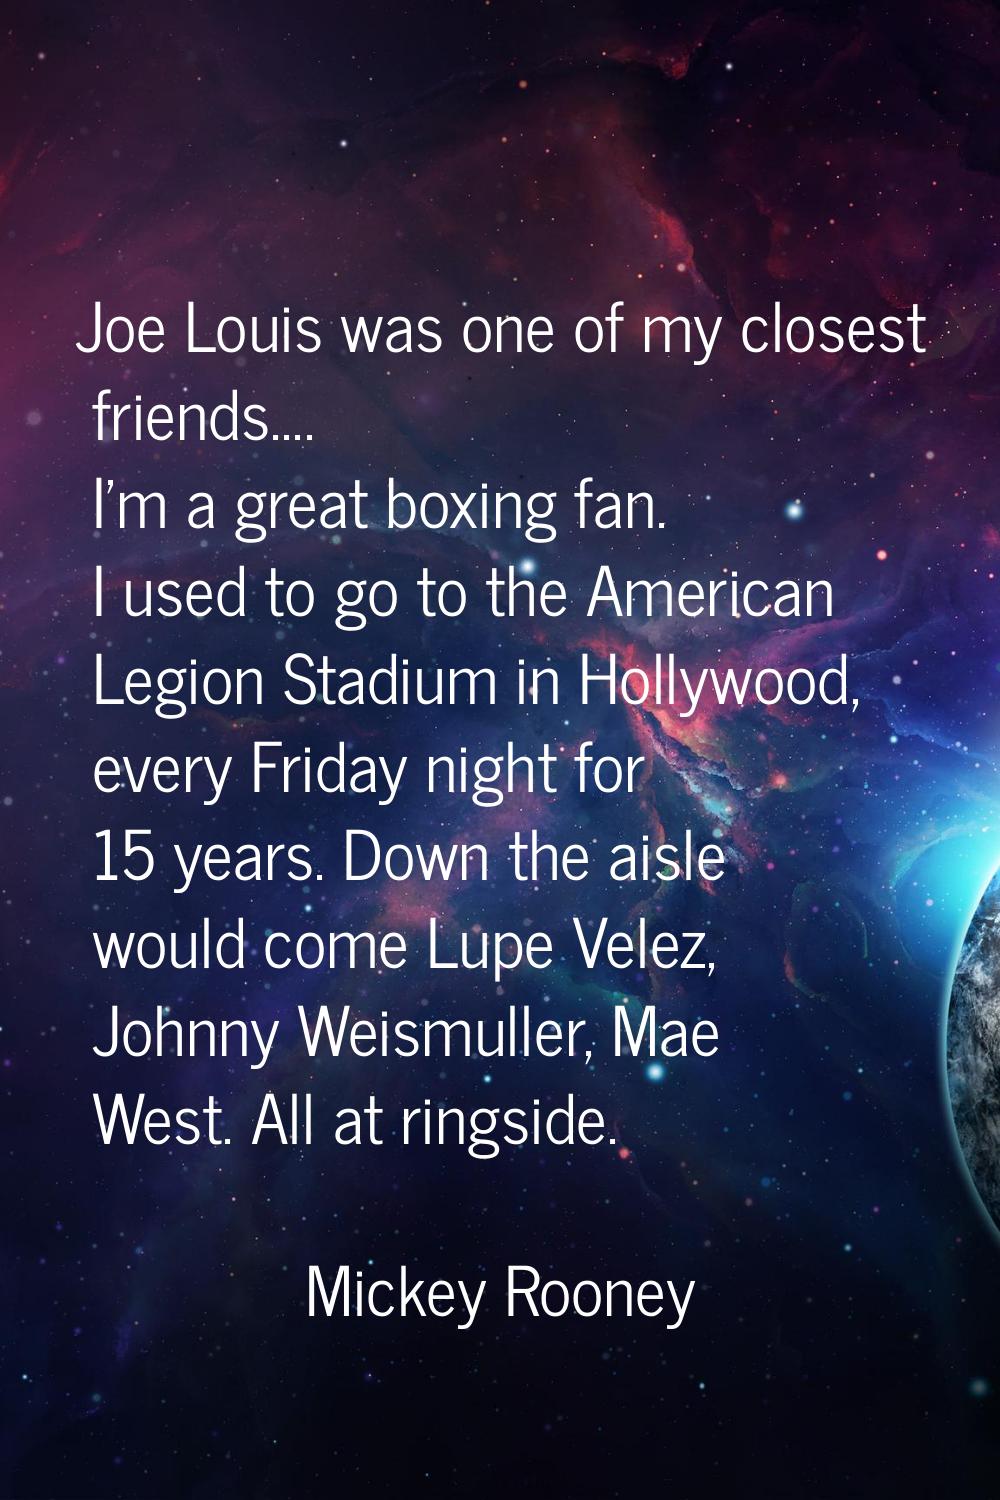 Joe Louis was one of my closest friends.... I'm a great boxing fan. I used to go to the American Le